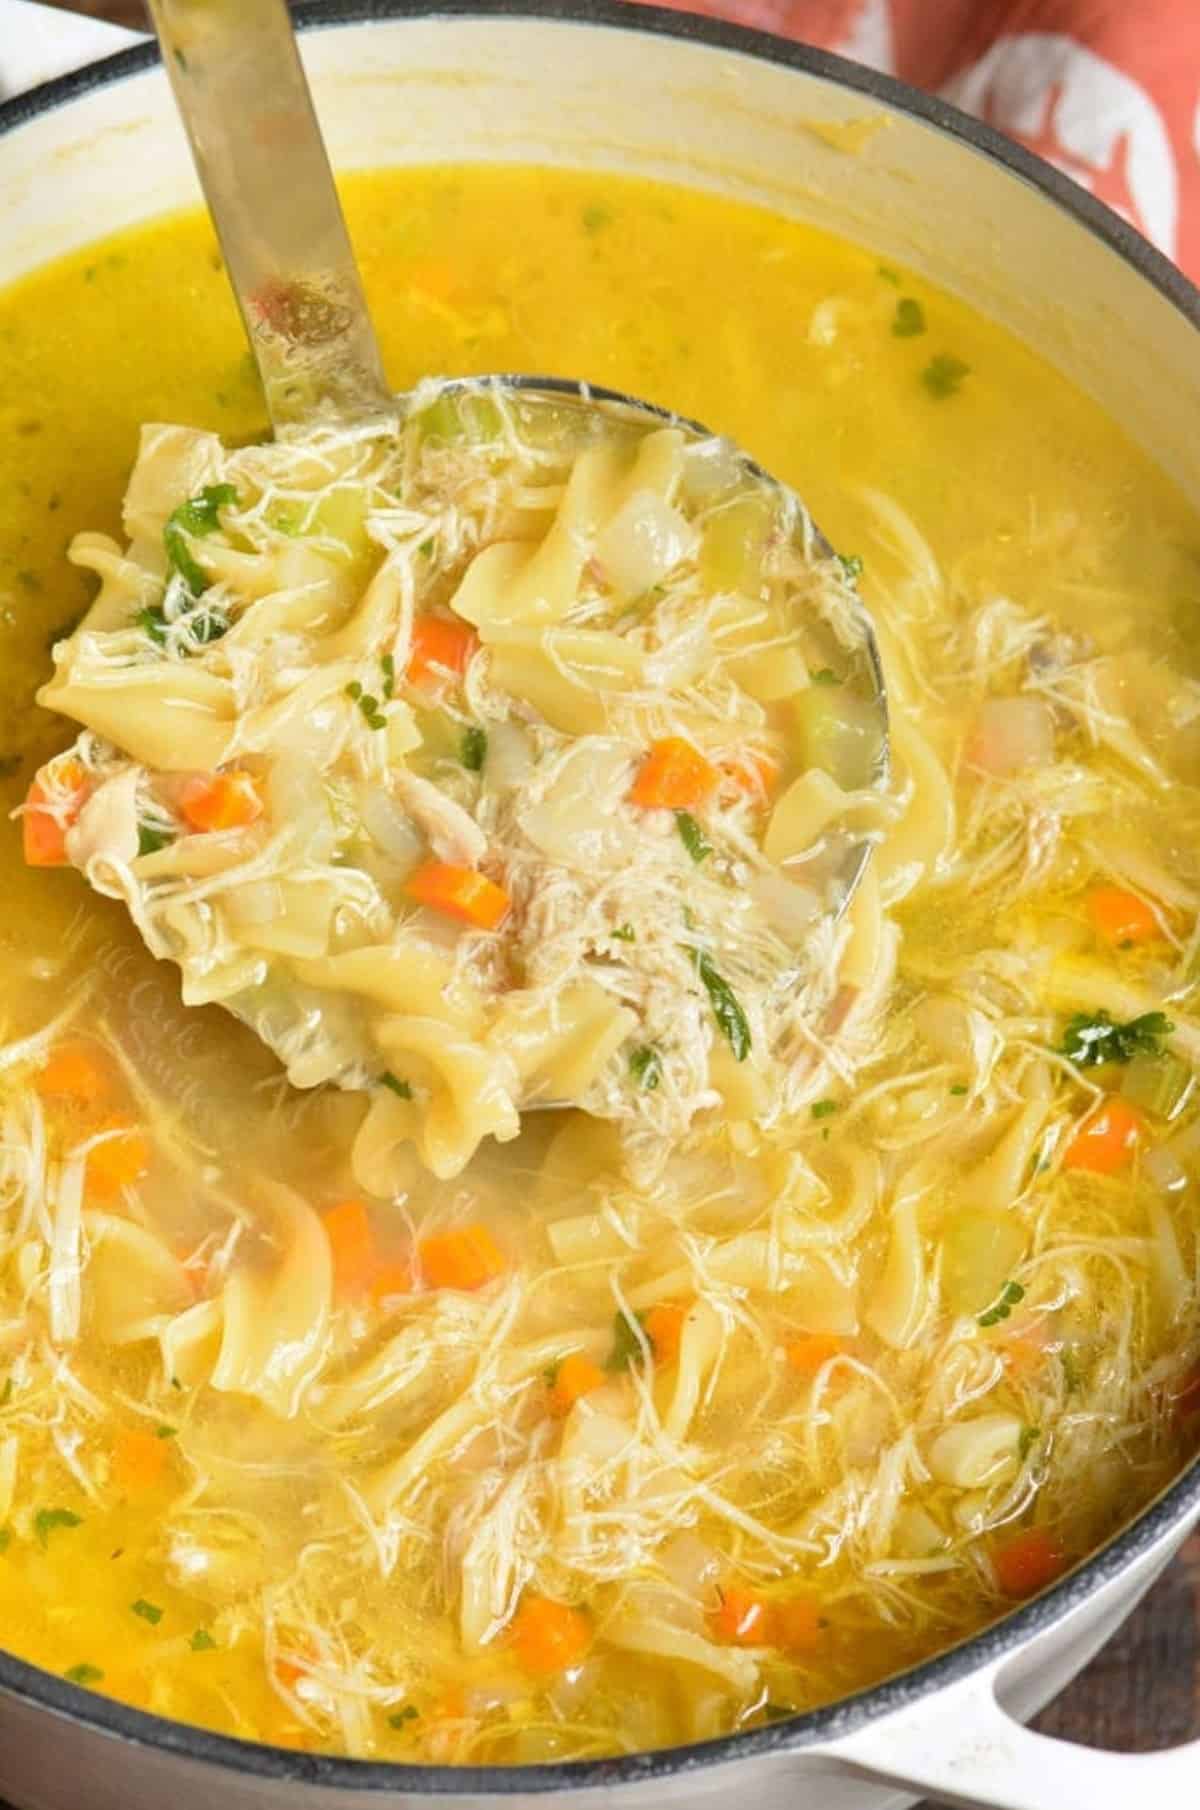 Chicken noodle soup in a stock pot with a ladle scooping some out,